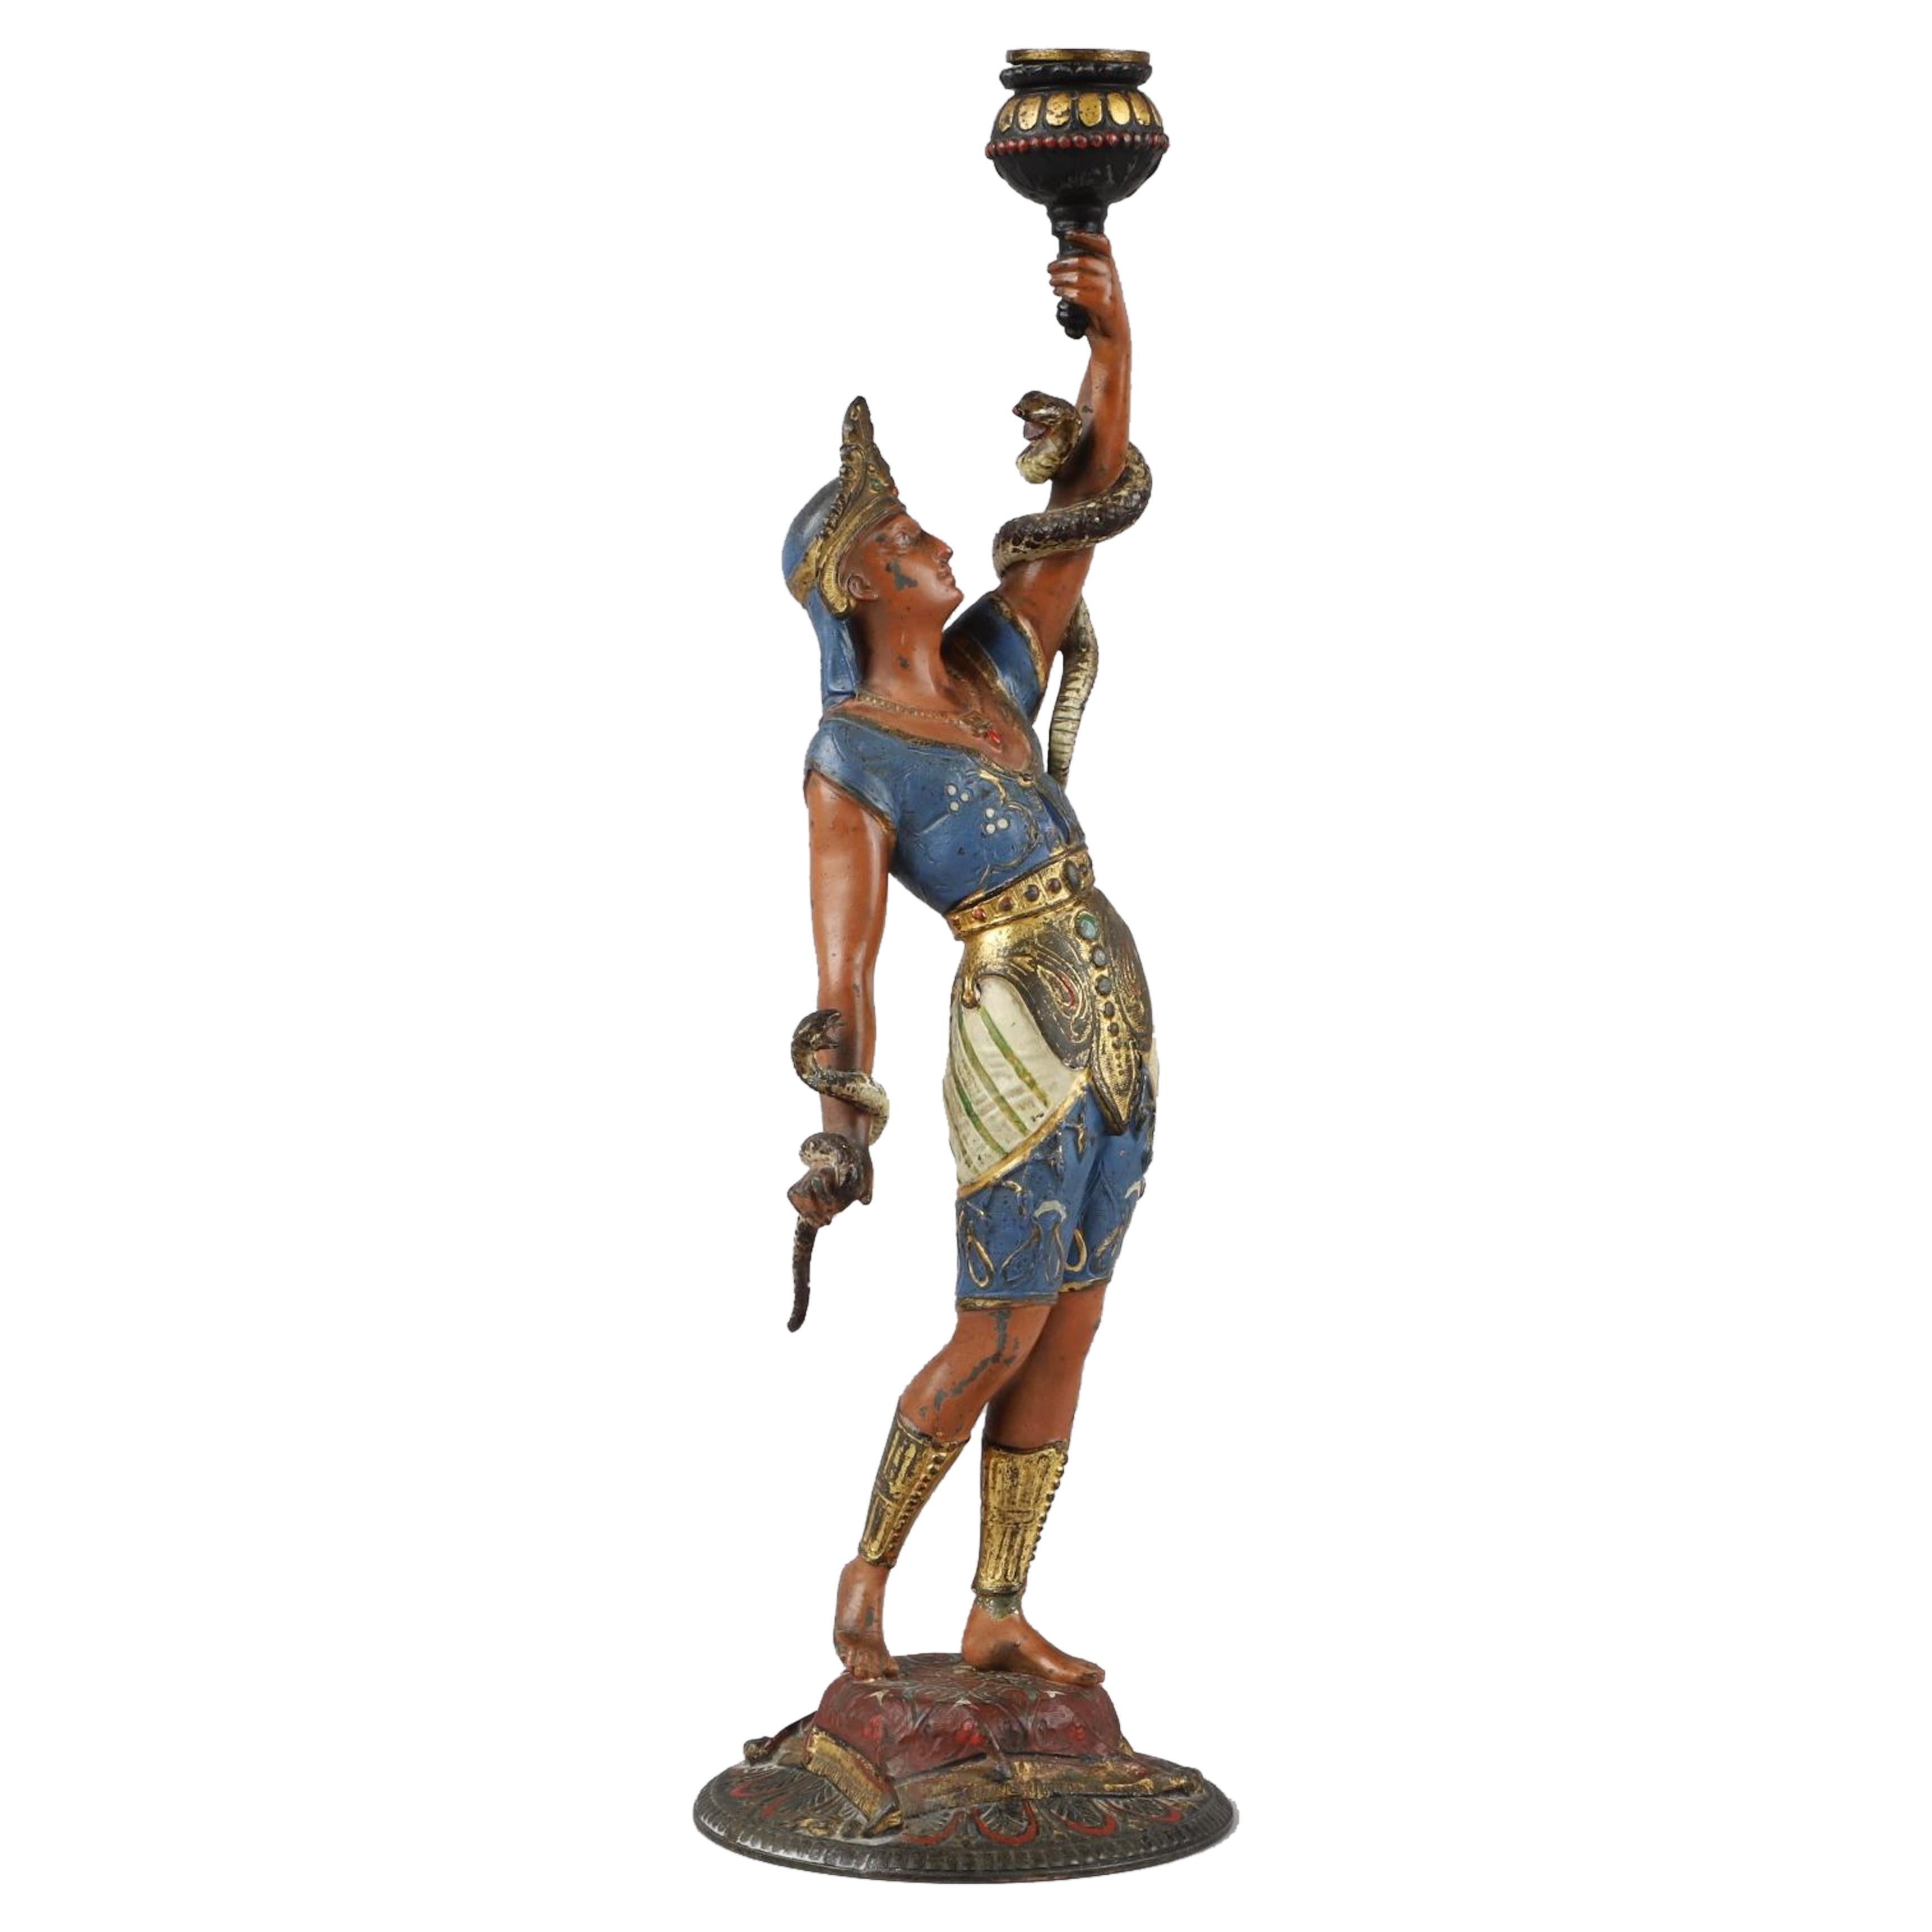 French Empire Egyptian Revival Candlestick Depicting Man with Snakes